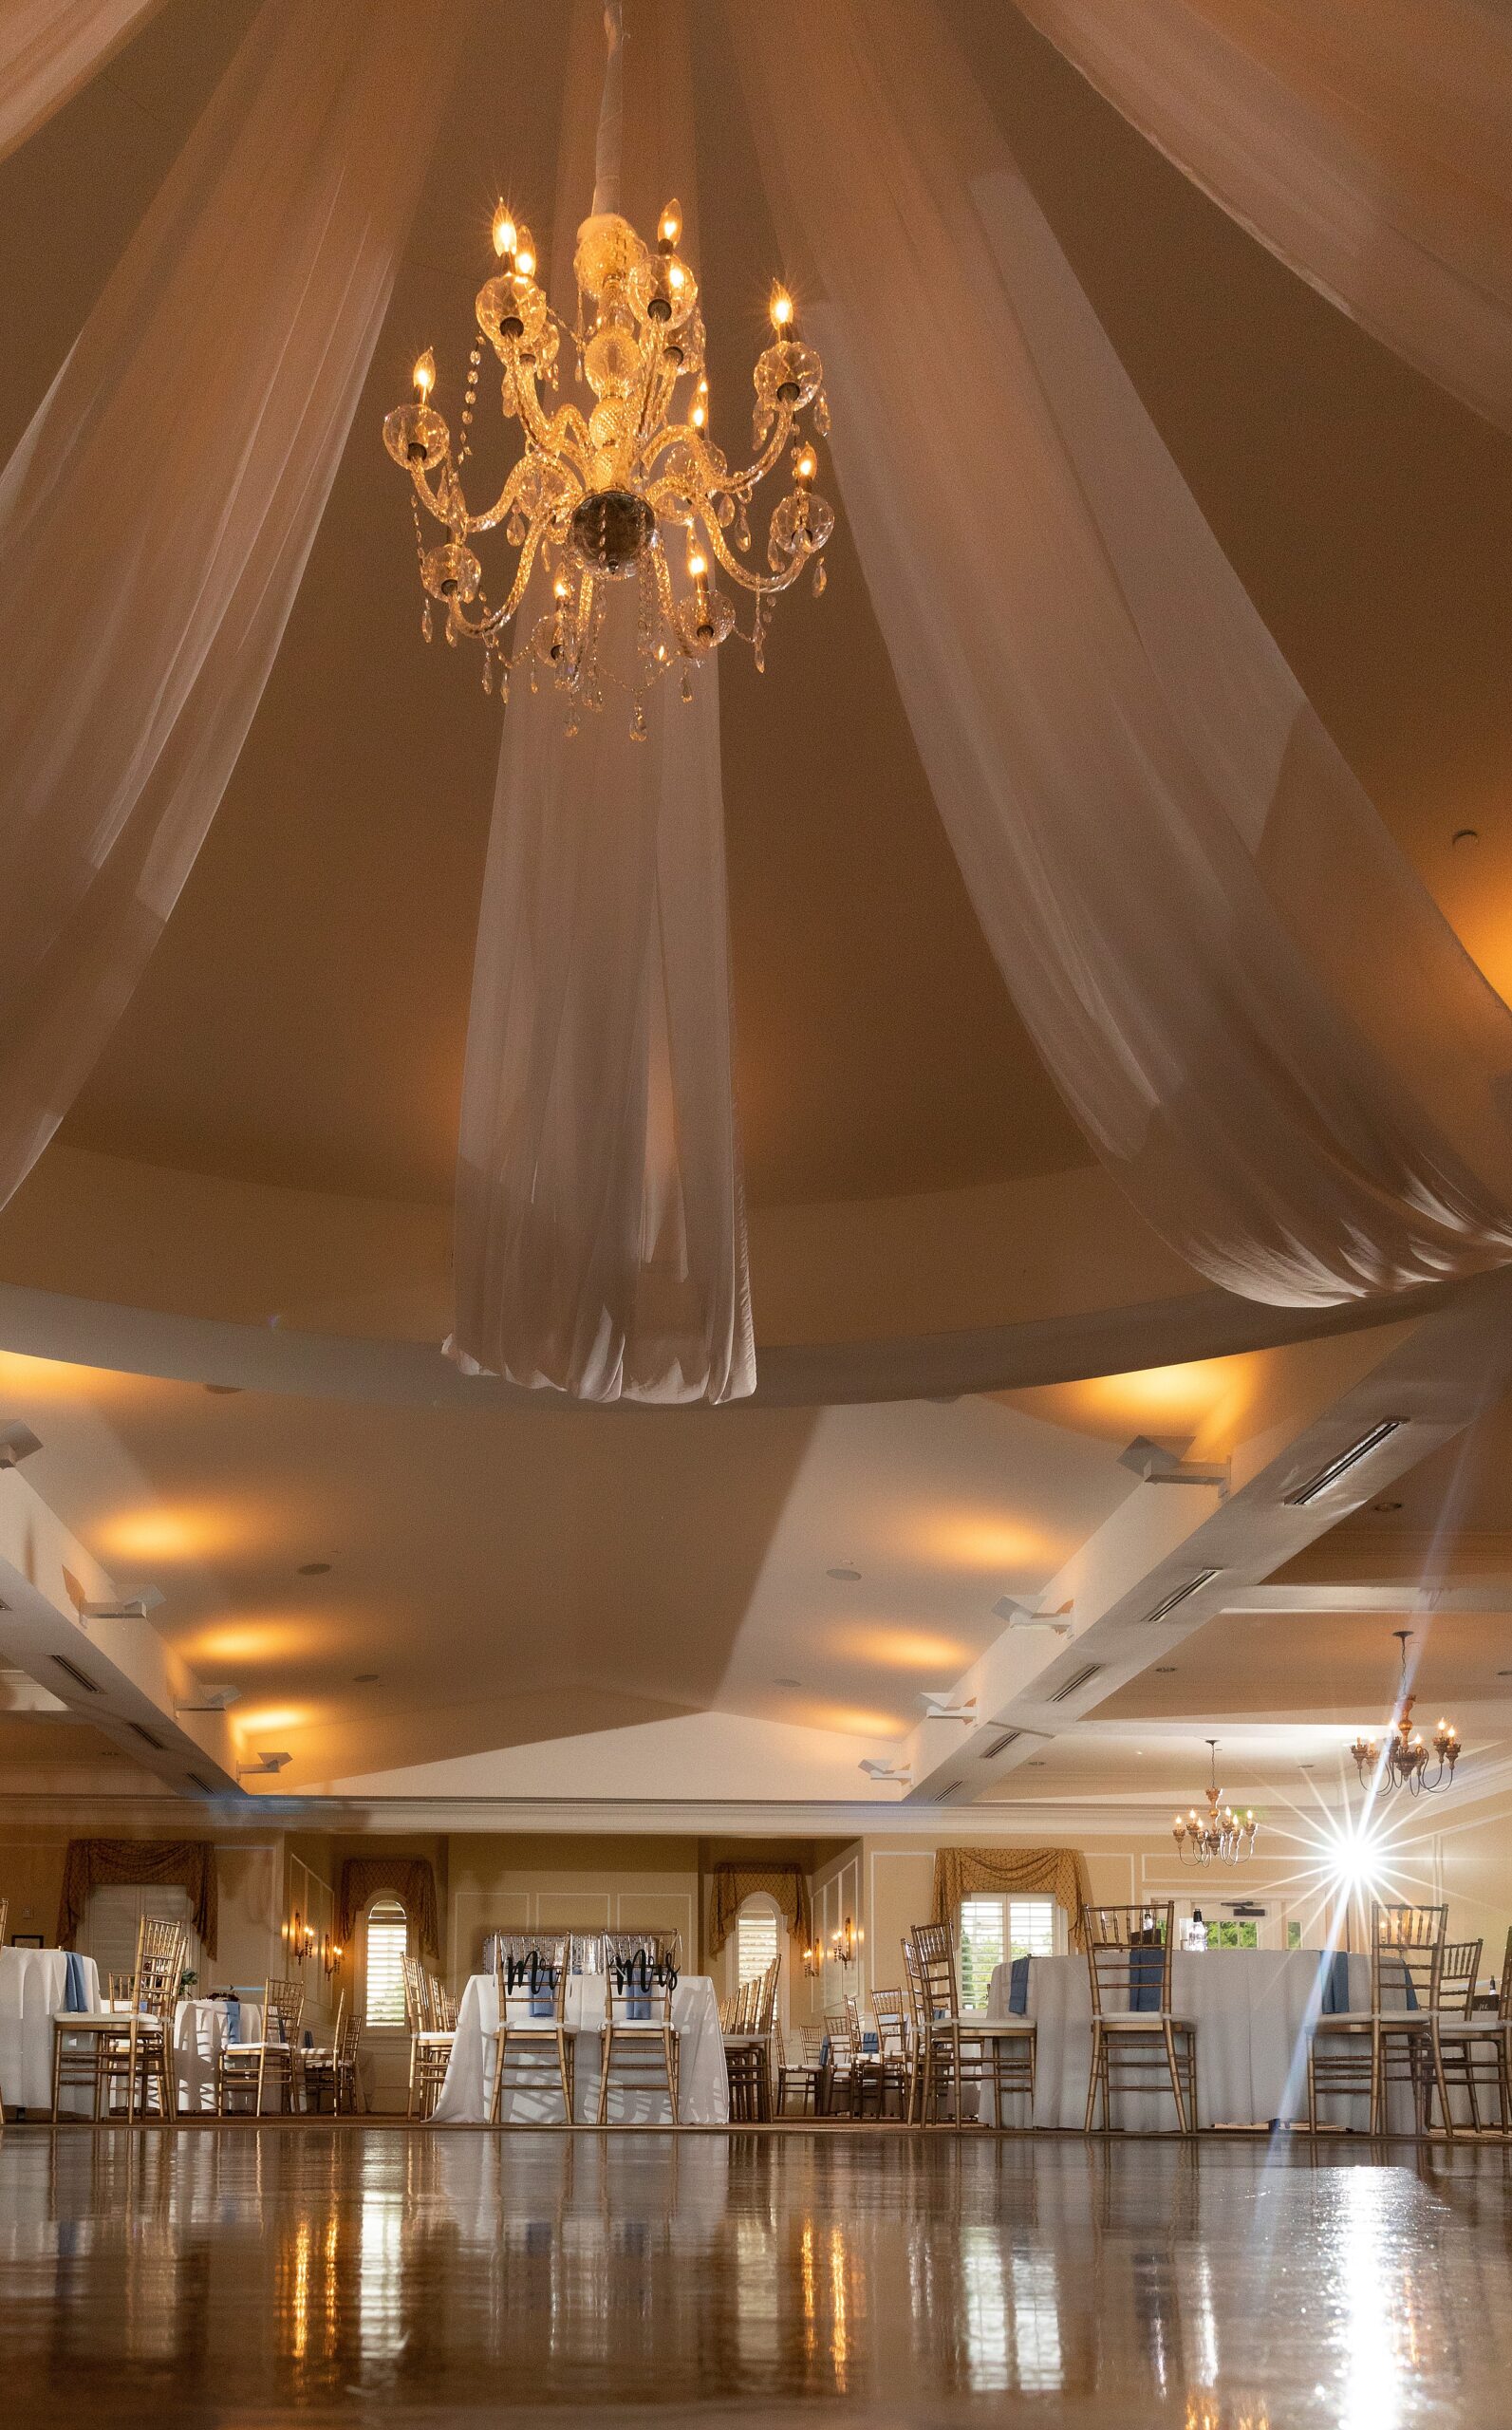 Details of the crystal chandelier and drapery of the river house events wedding reception venue